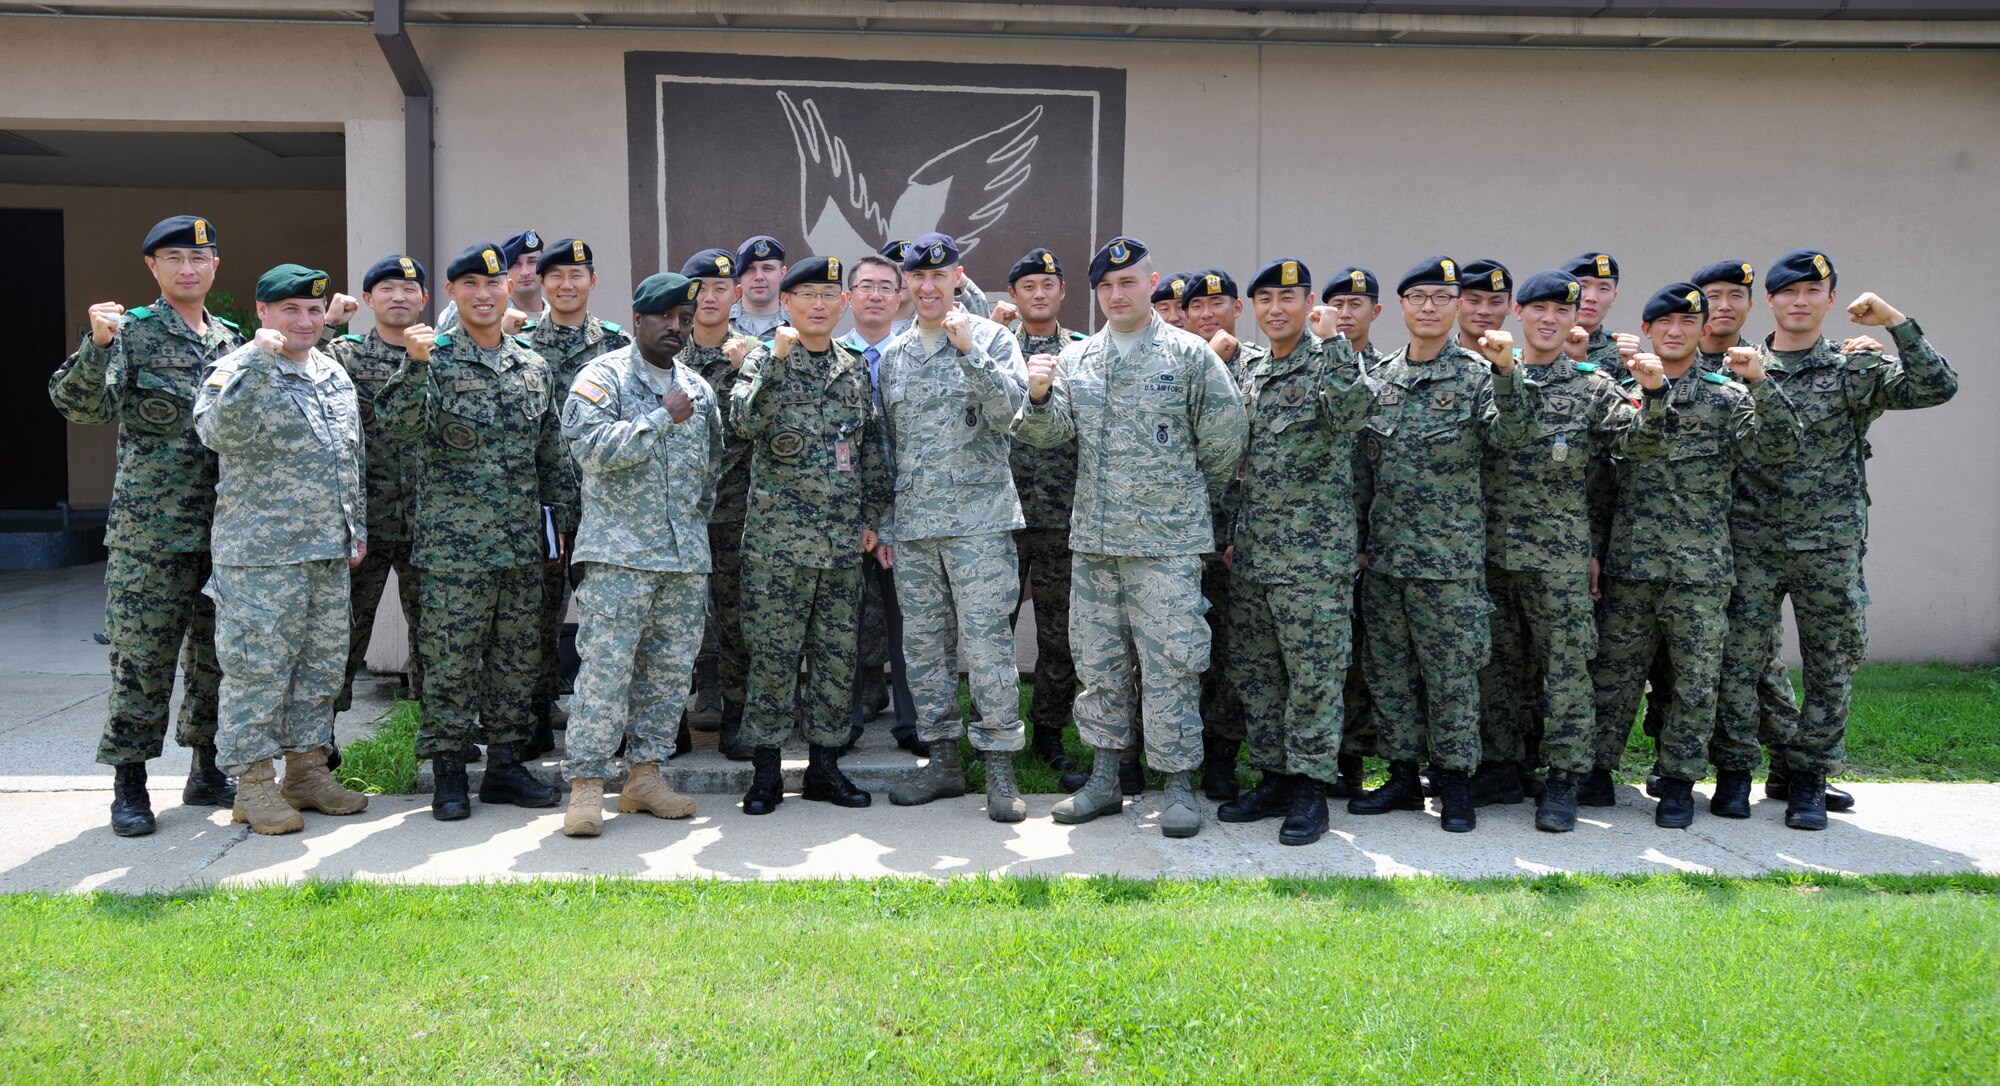 Members of the 51st Security Forces Squadron pose for a photo with members of the 9th Battalion, 51st Infantry Division, Republic of Korea army, and two members of the U.S. Army at Osan Air Base, ROK, July 25, 2013. The ROKA’s special forces unit was on hand to have their first face-to-face meeting with the 51st Security Forces Squadron air base defense and intelligence section. (U.S. Air Force photo/Senior Airman Siuta B. Ika)